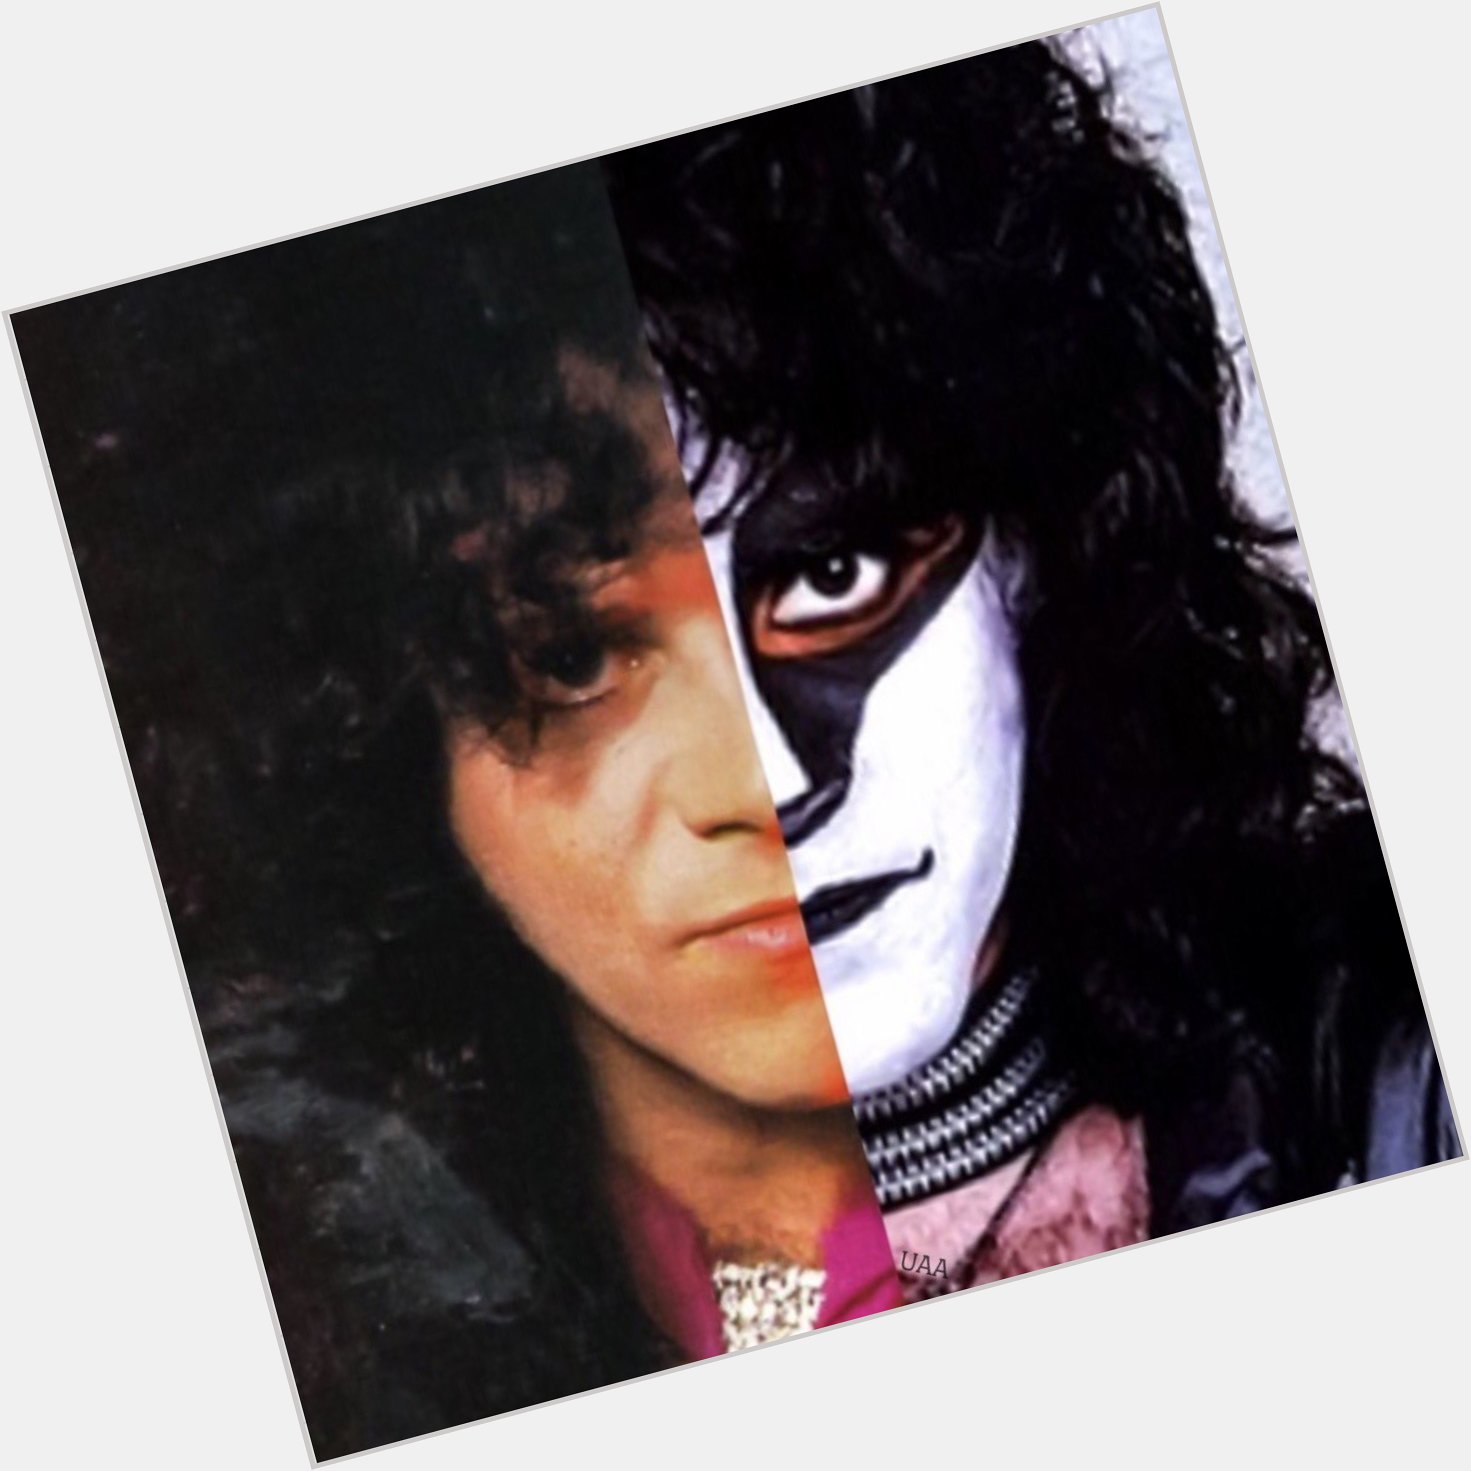 Happy Birthday to Eric Carr.
You are missed.      &                    